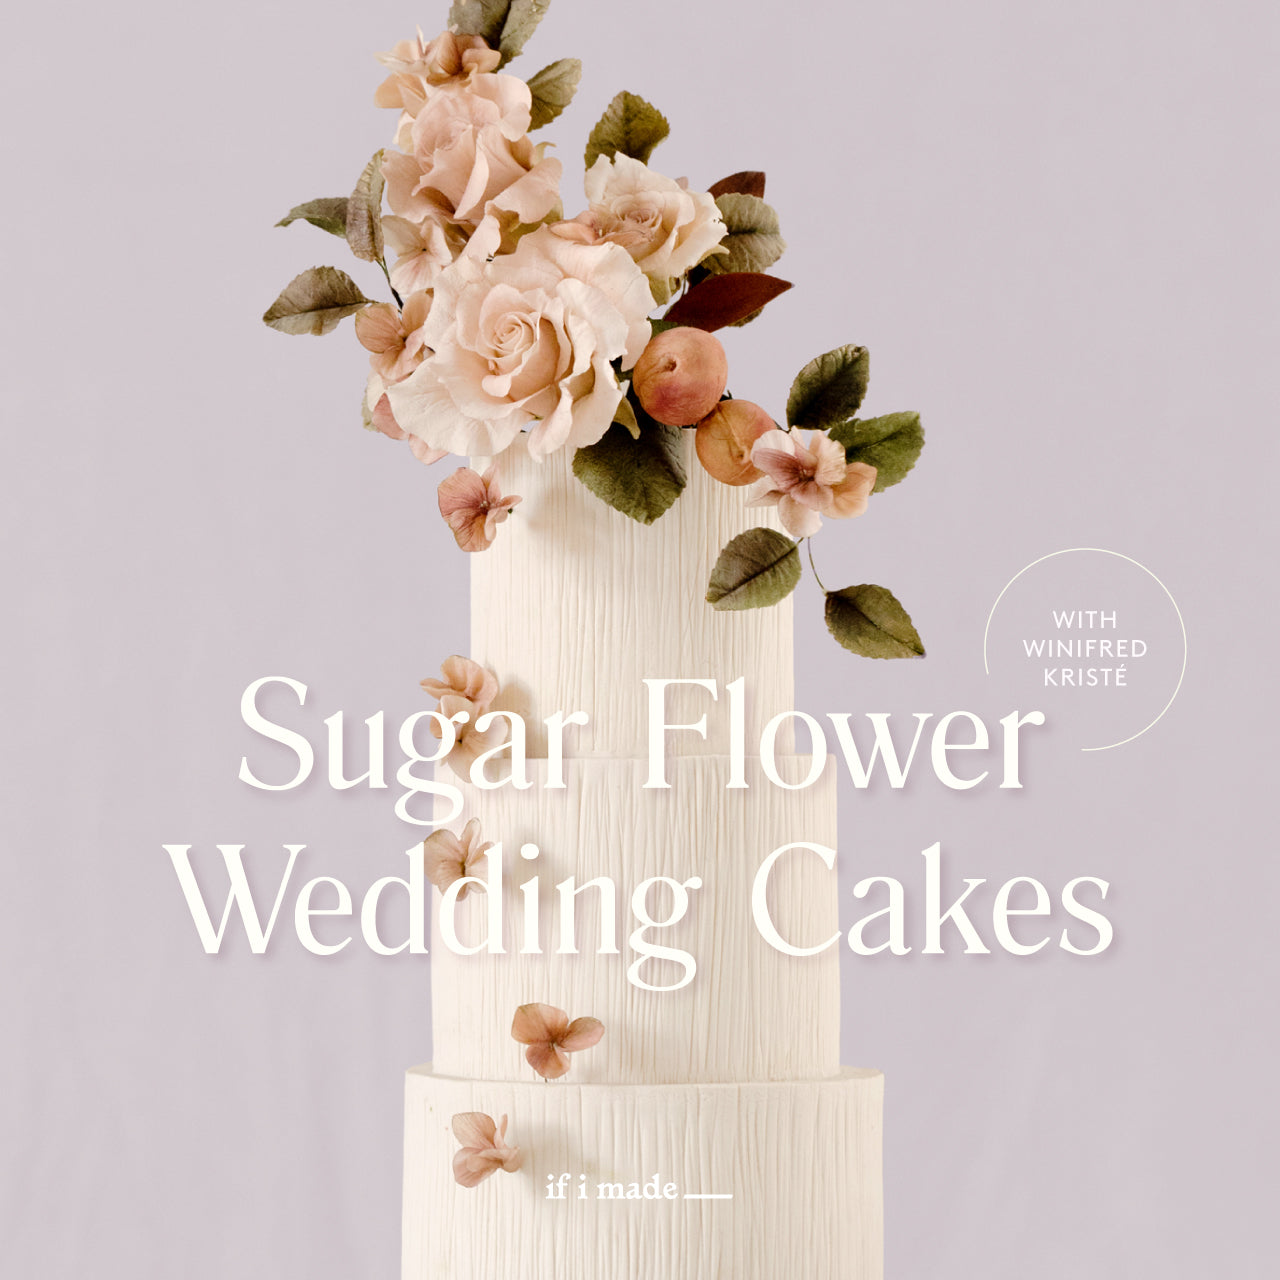 Sugar Flower Wedding Cakes with Winifred Kriste (EEGPP21) - 19 payments of $69